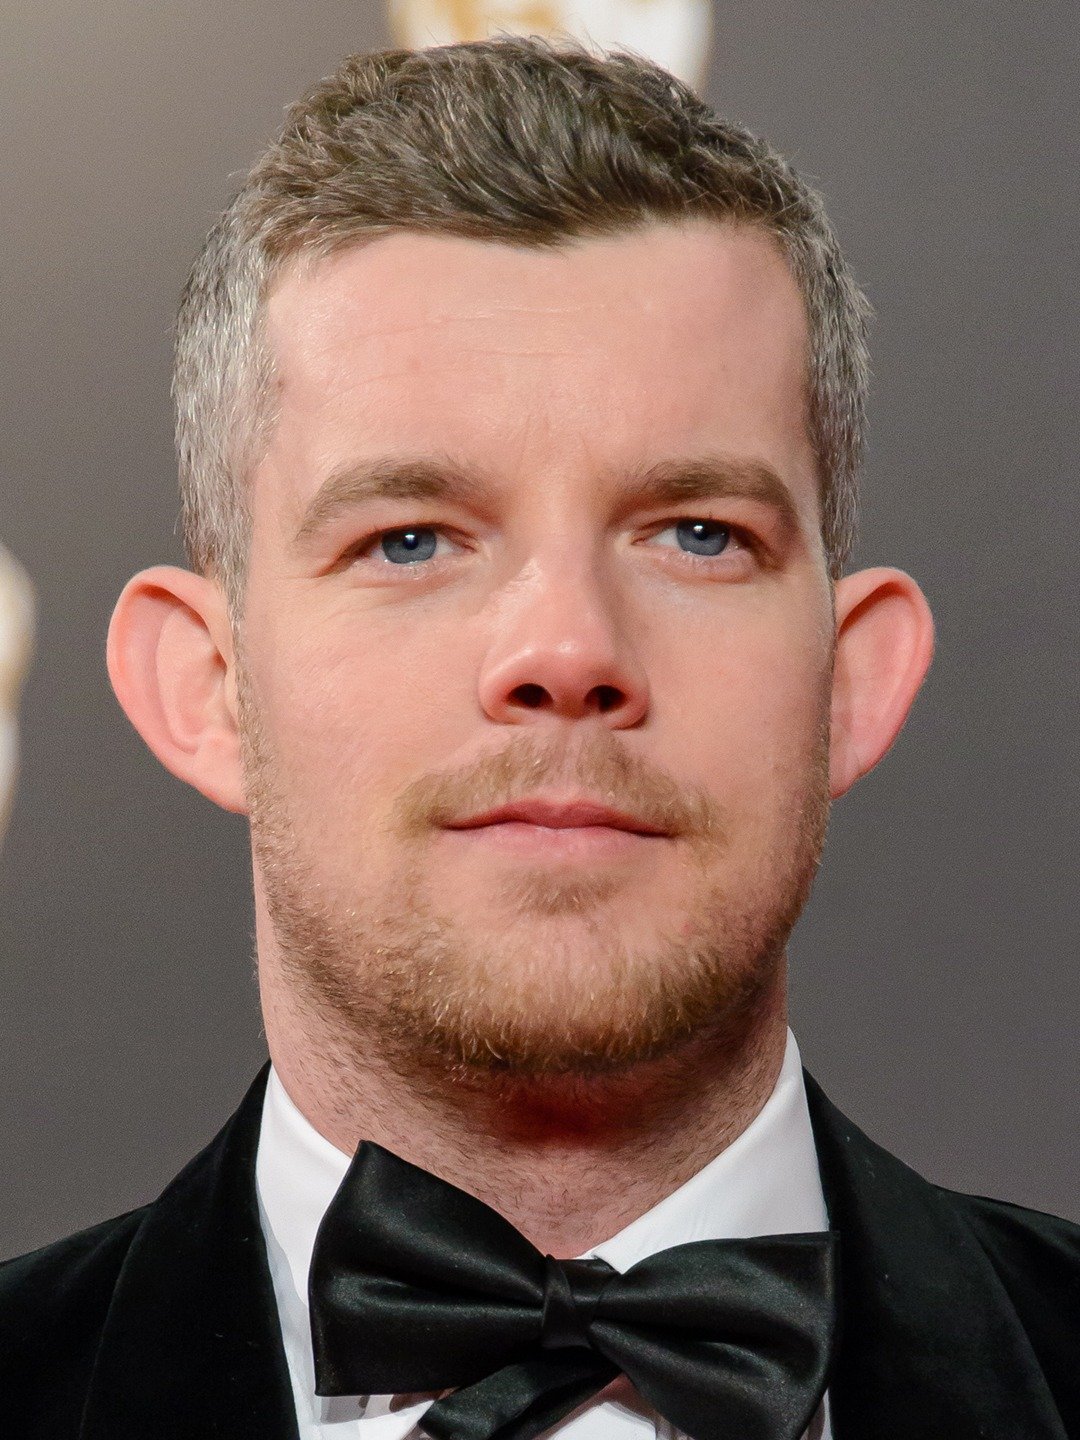 How tall is Russell Tovey?